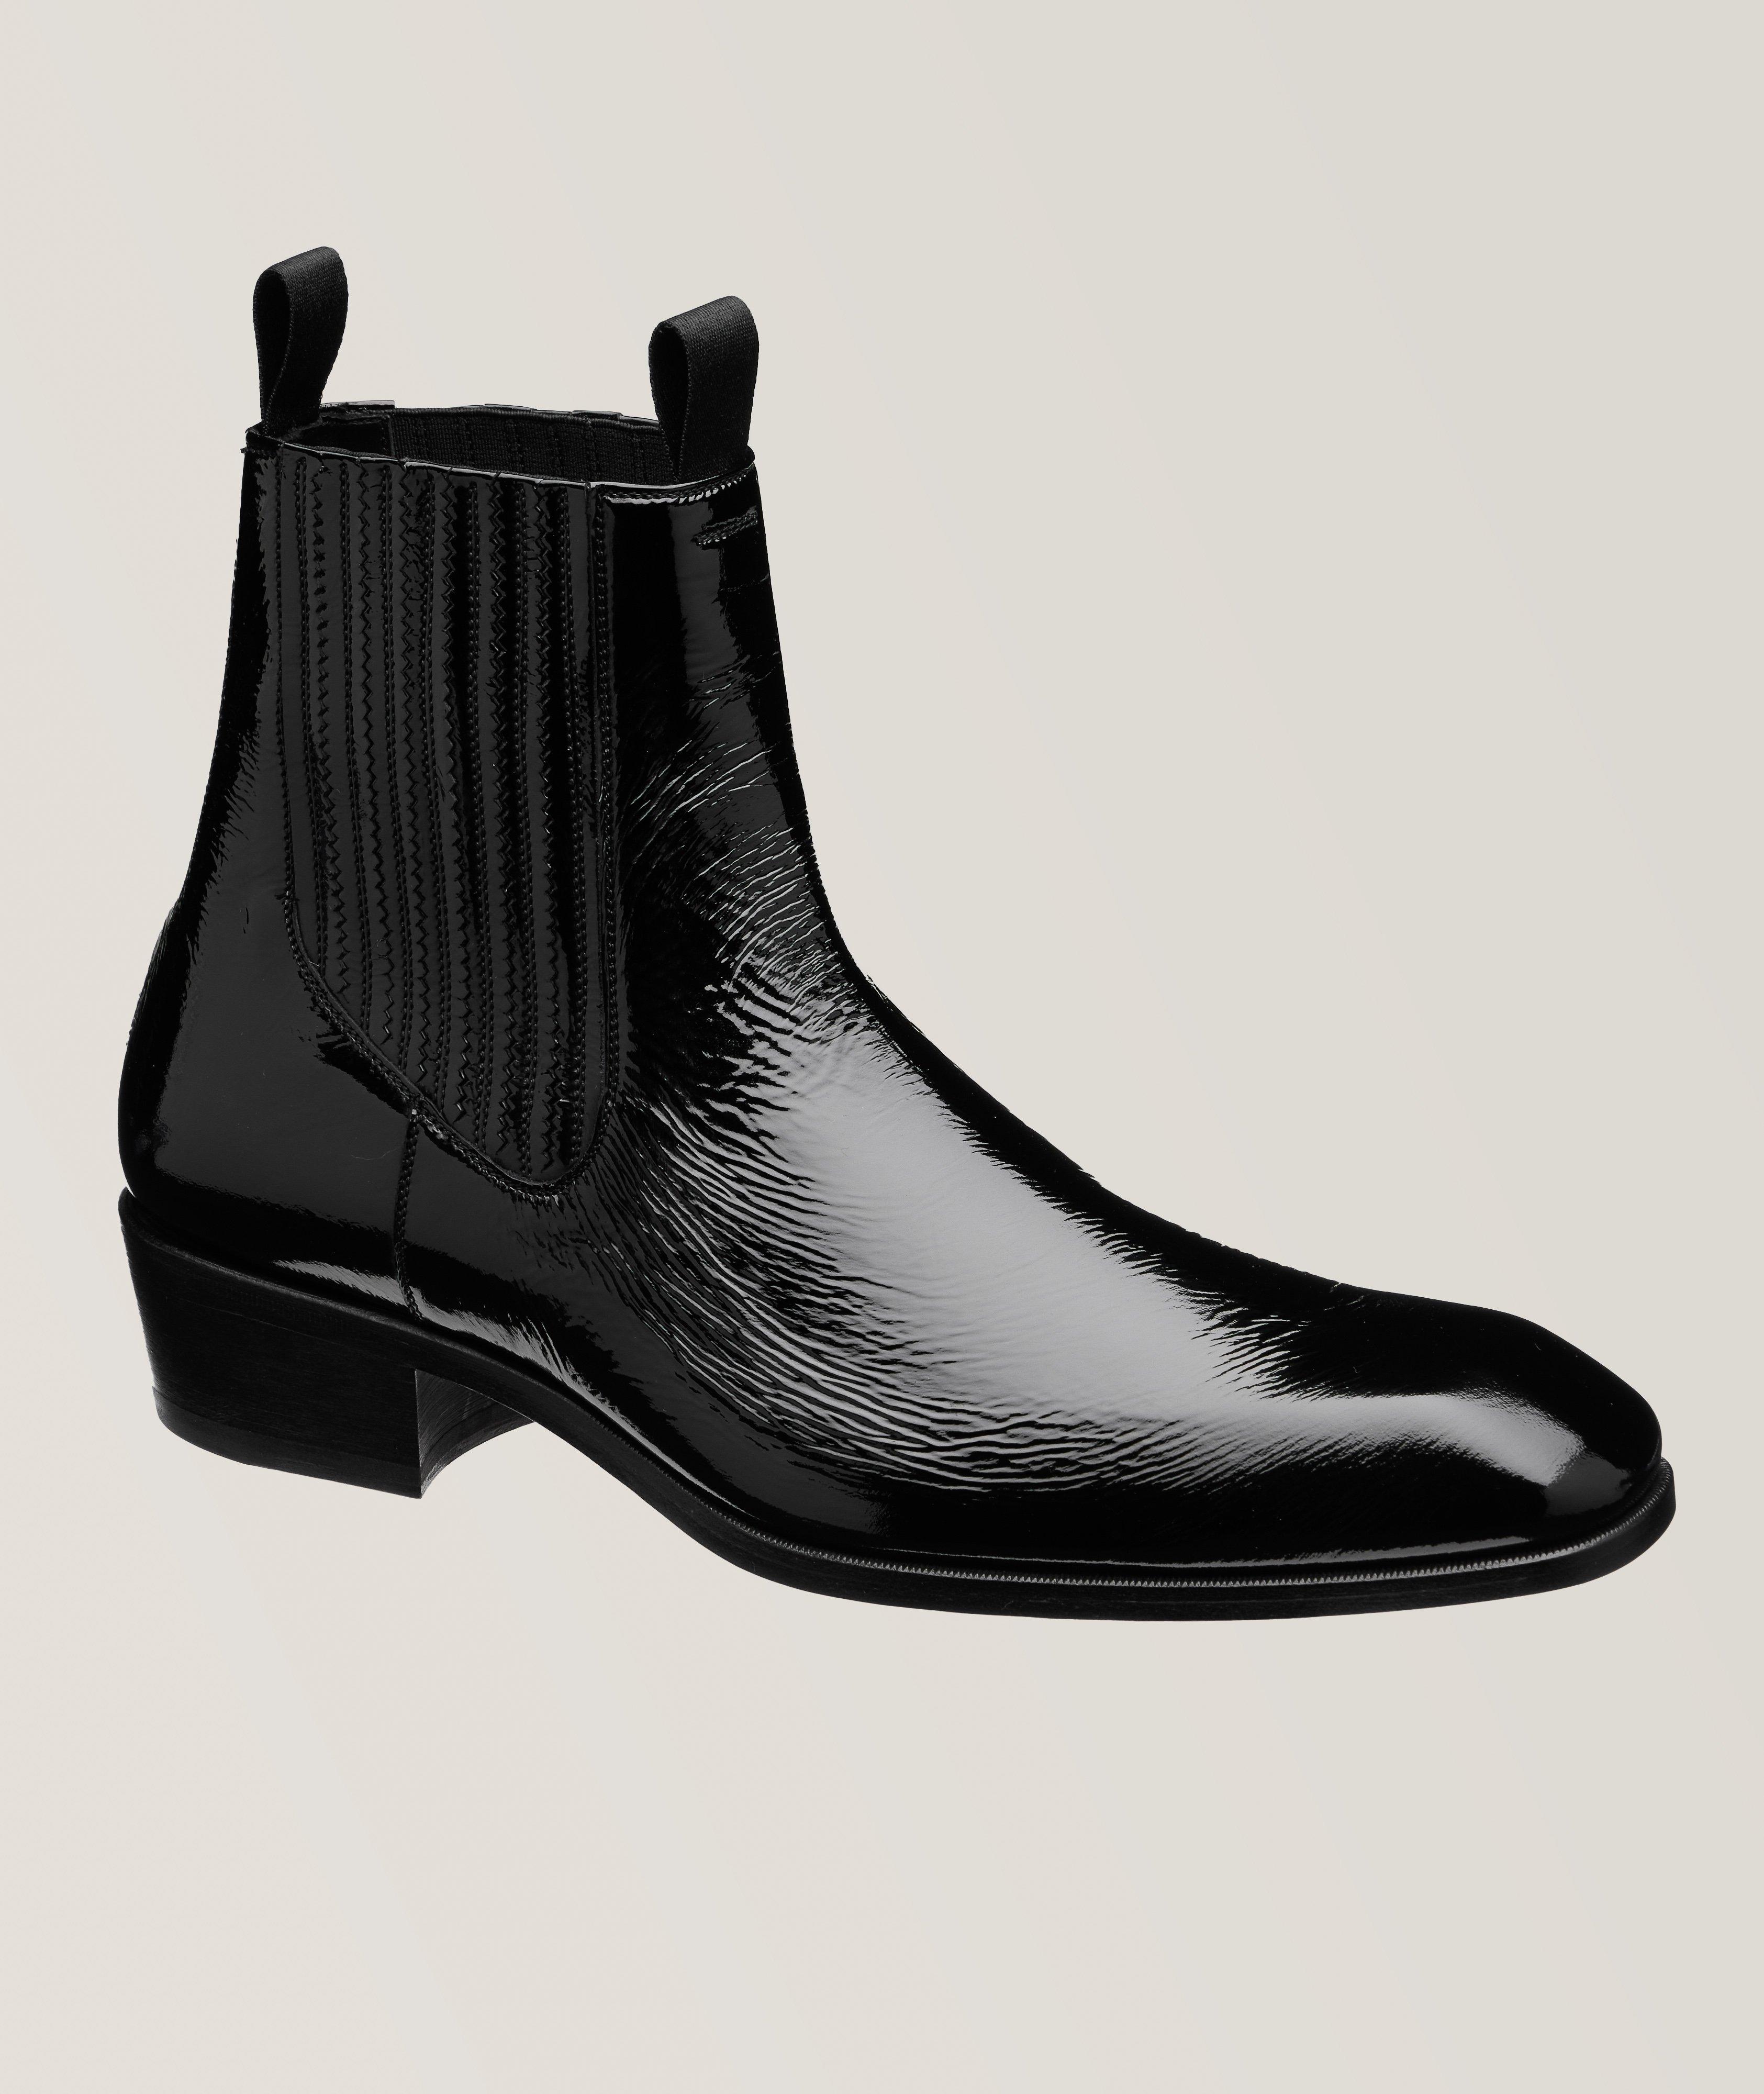 Calfskin Leather Chelsea Boots image 0